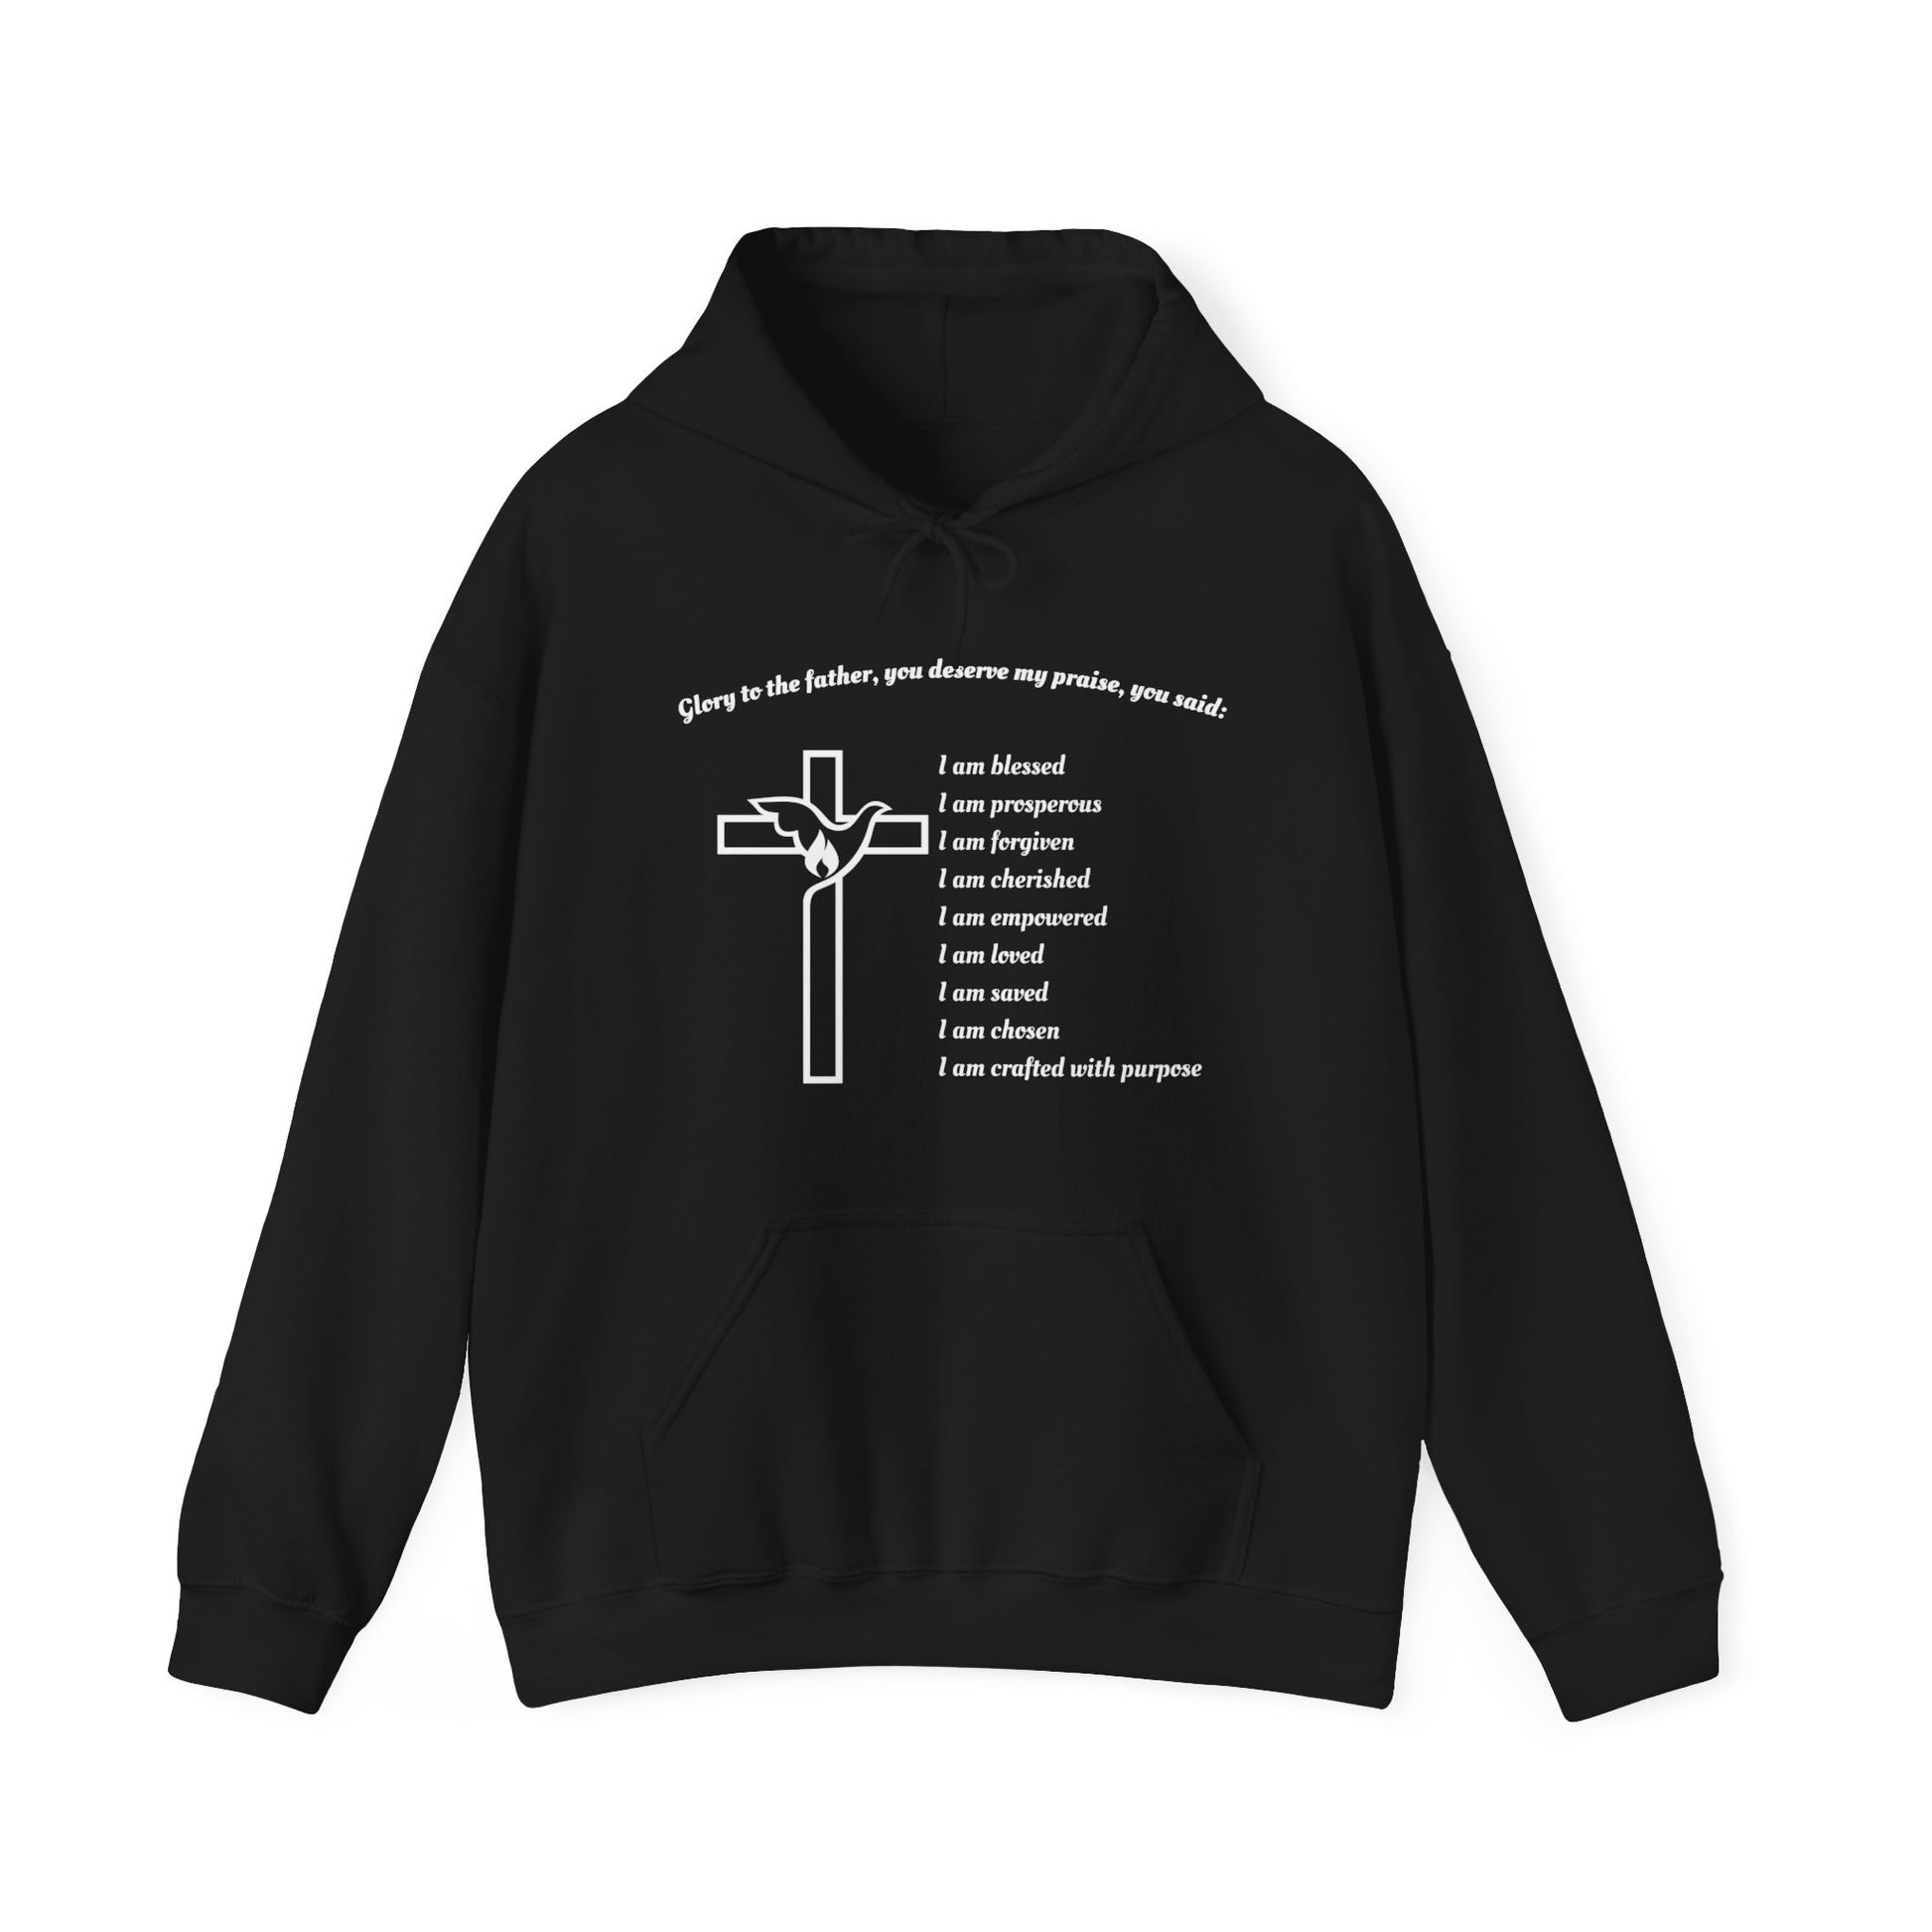 I am Glory to the Father Hooded Sweatshirt Unisex Cozy Heavy Blend44